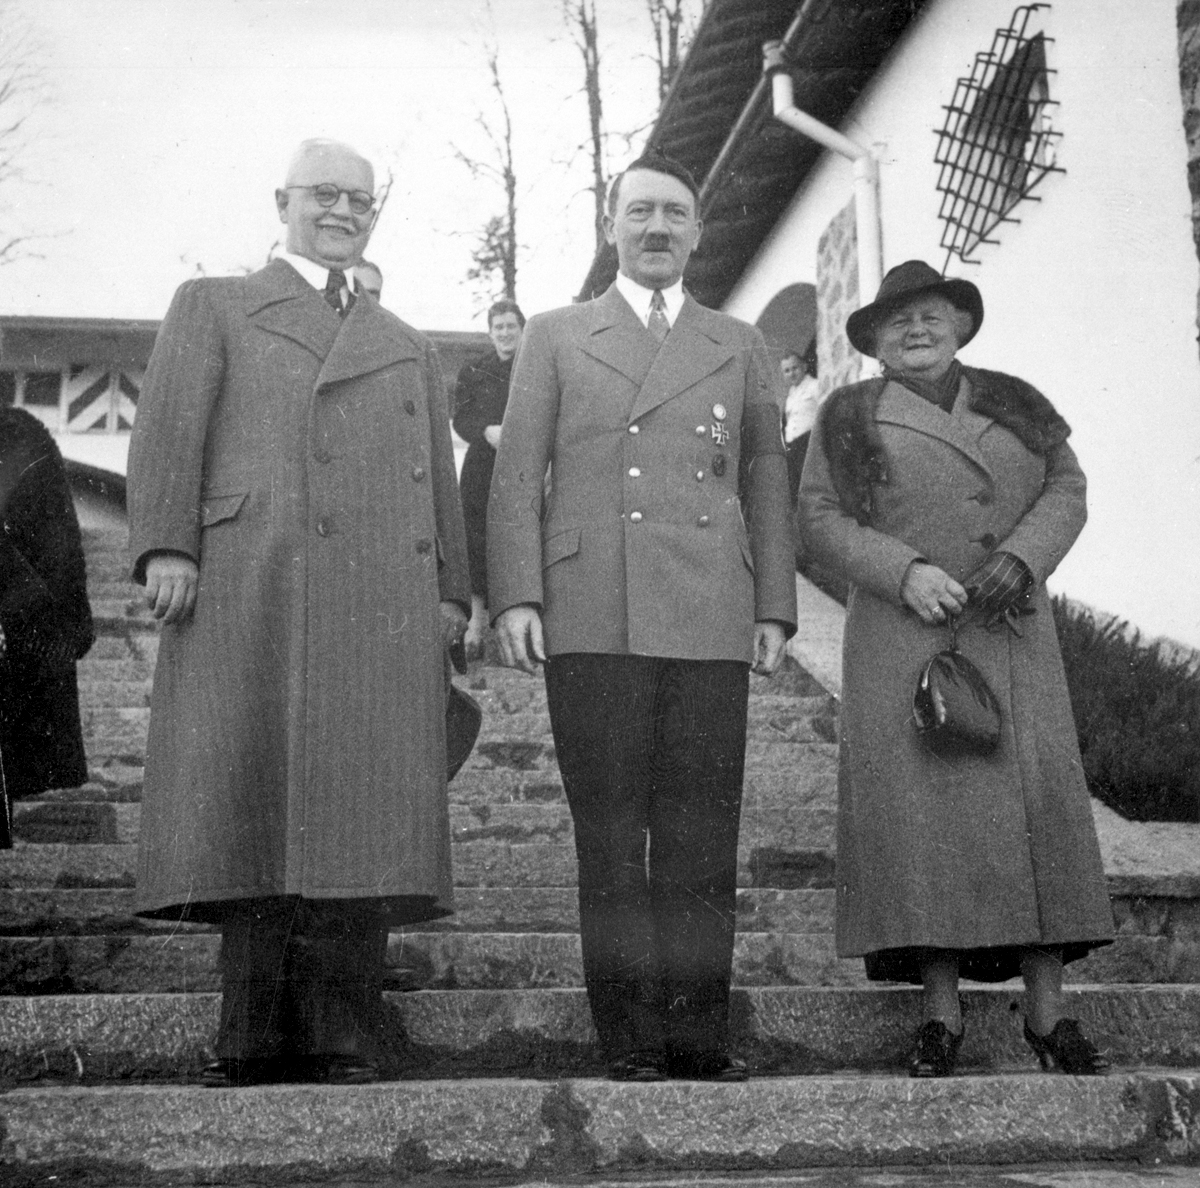 Adolf Hitler welcomes Franz Xaver Schwarz and his wife at the Berghof for his birthday, from Eva Braun's albums